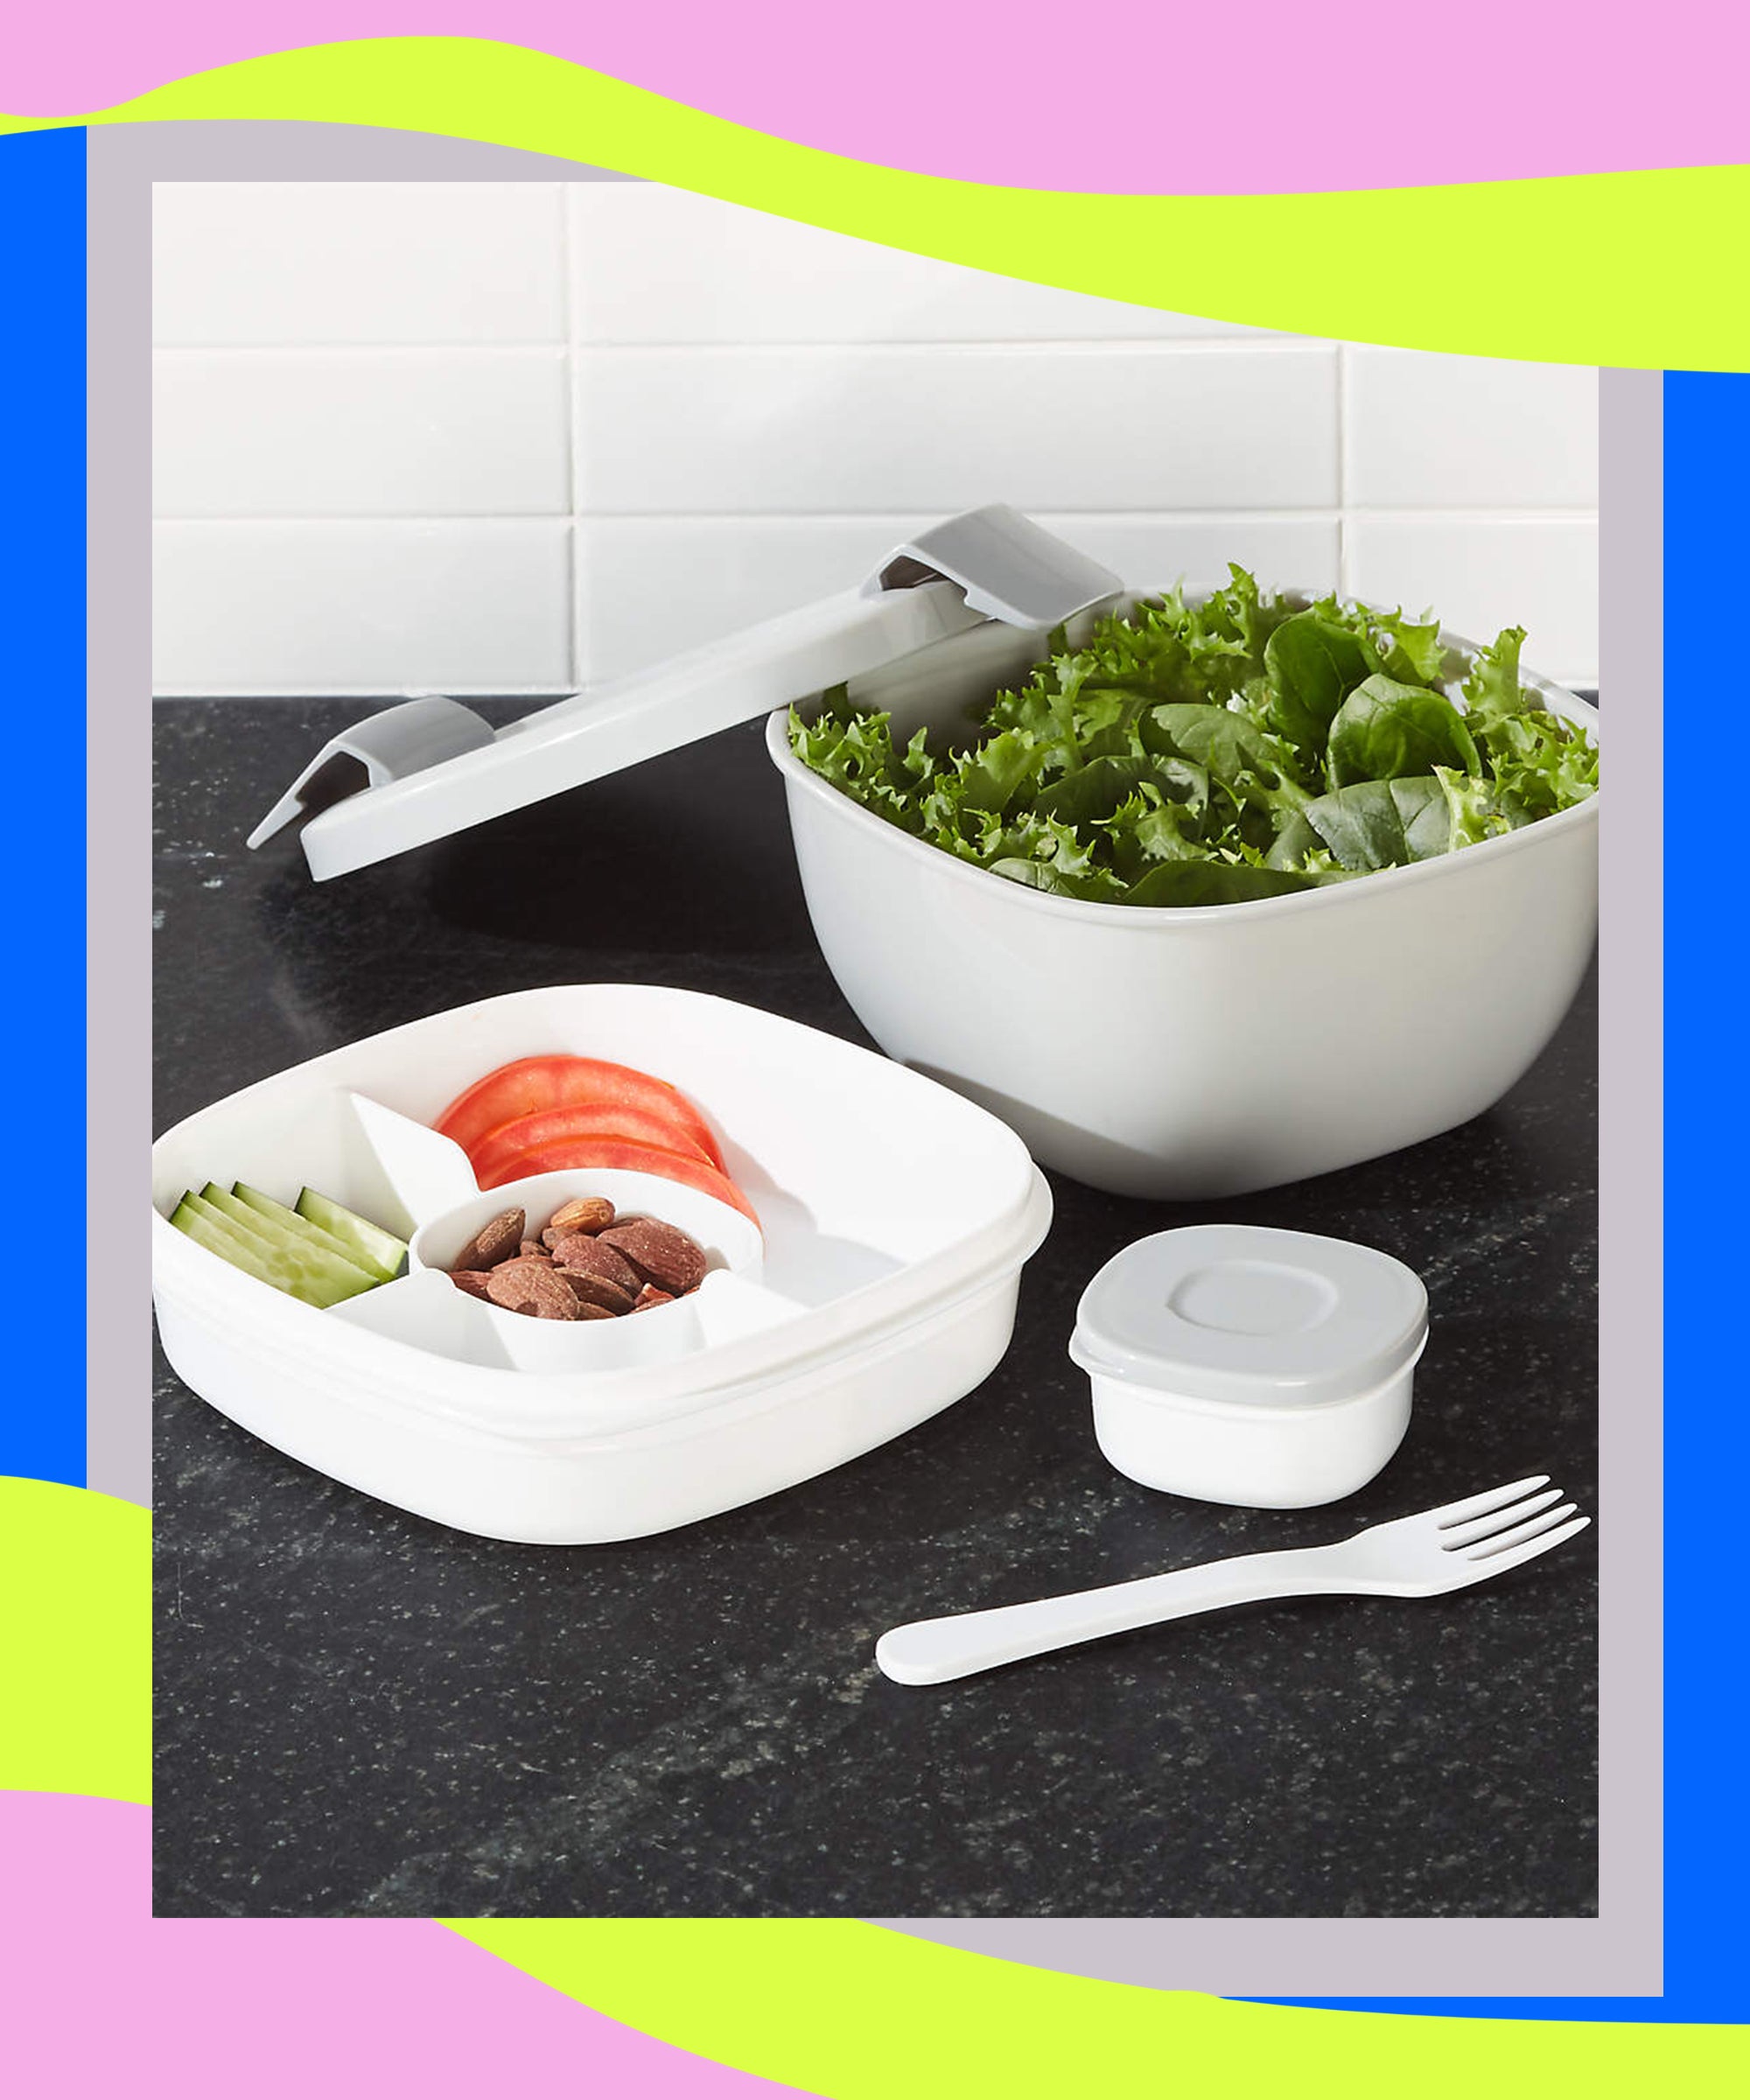 Get Your Greens In With The Salad Bowl Kit - S'well